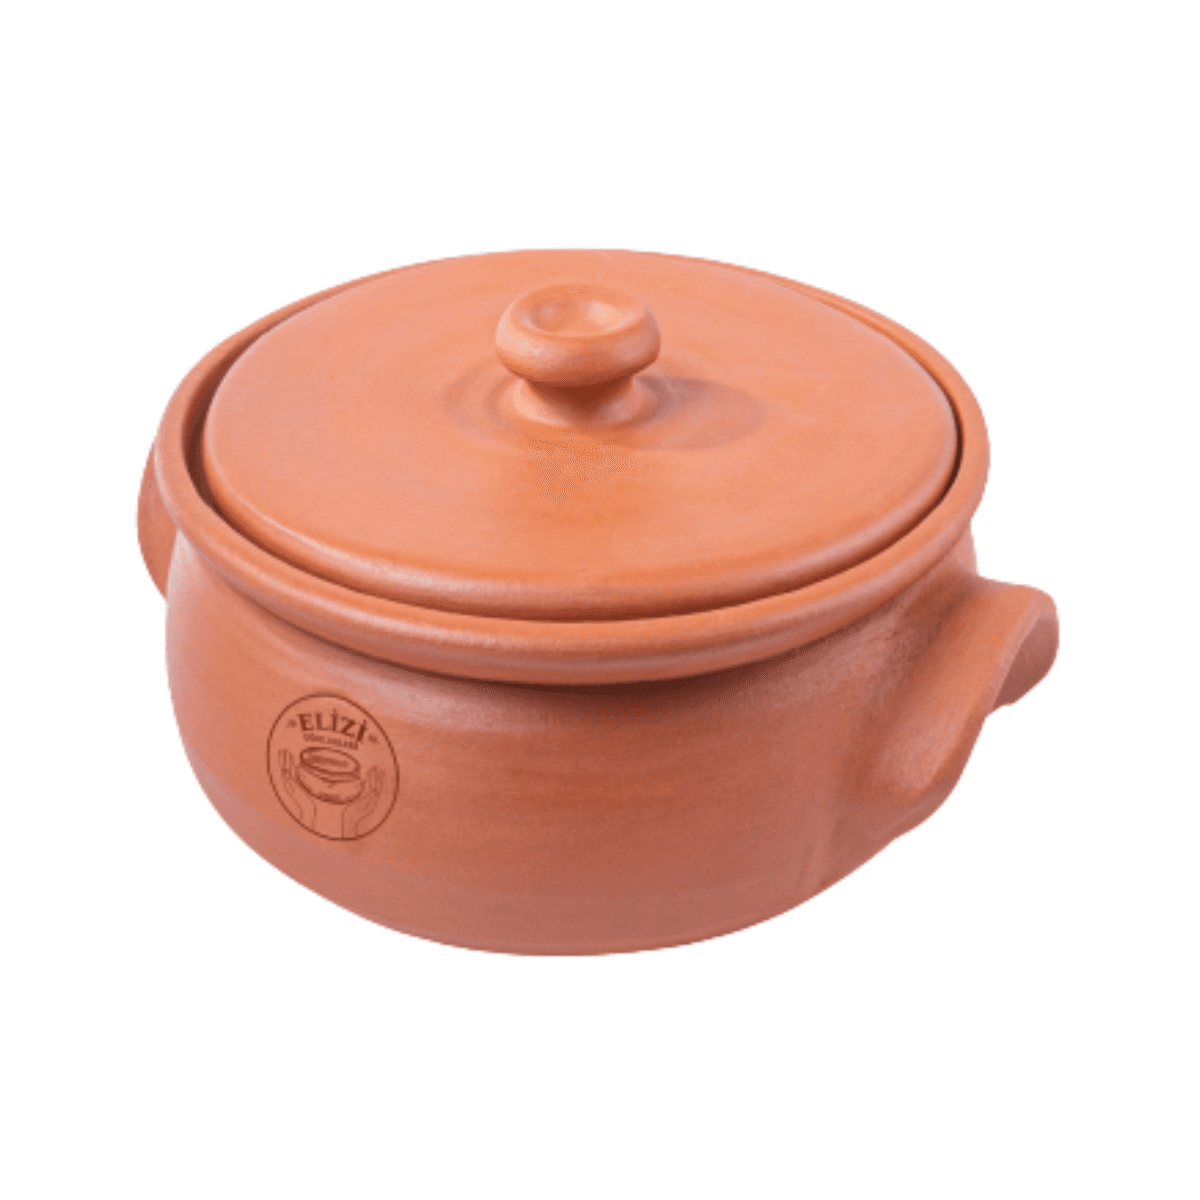 Elizi Clay Lined Pot 28 cm Brown Clay